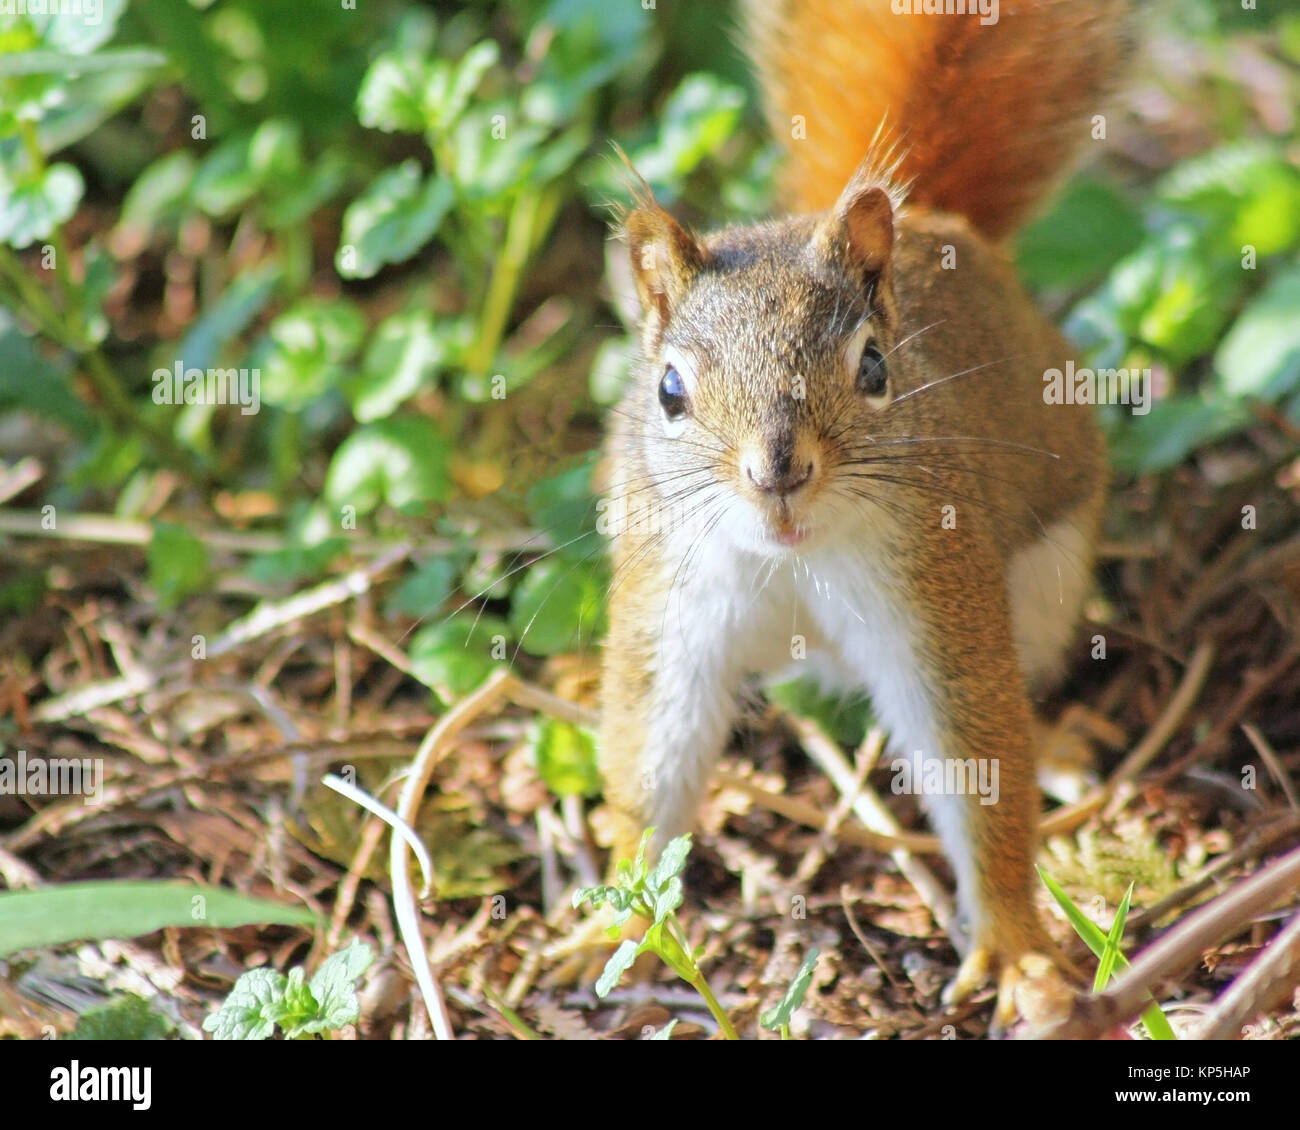 A tiny Red Squirrel has been caught off guard.  Startled he freezes still and looks at camera Stock Photo